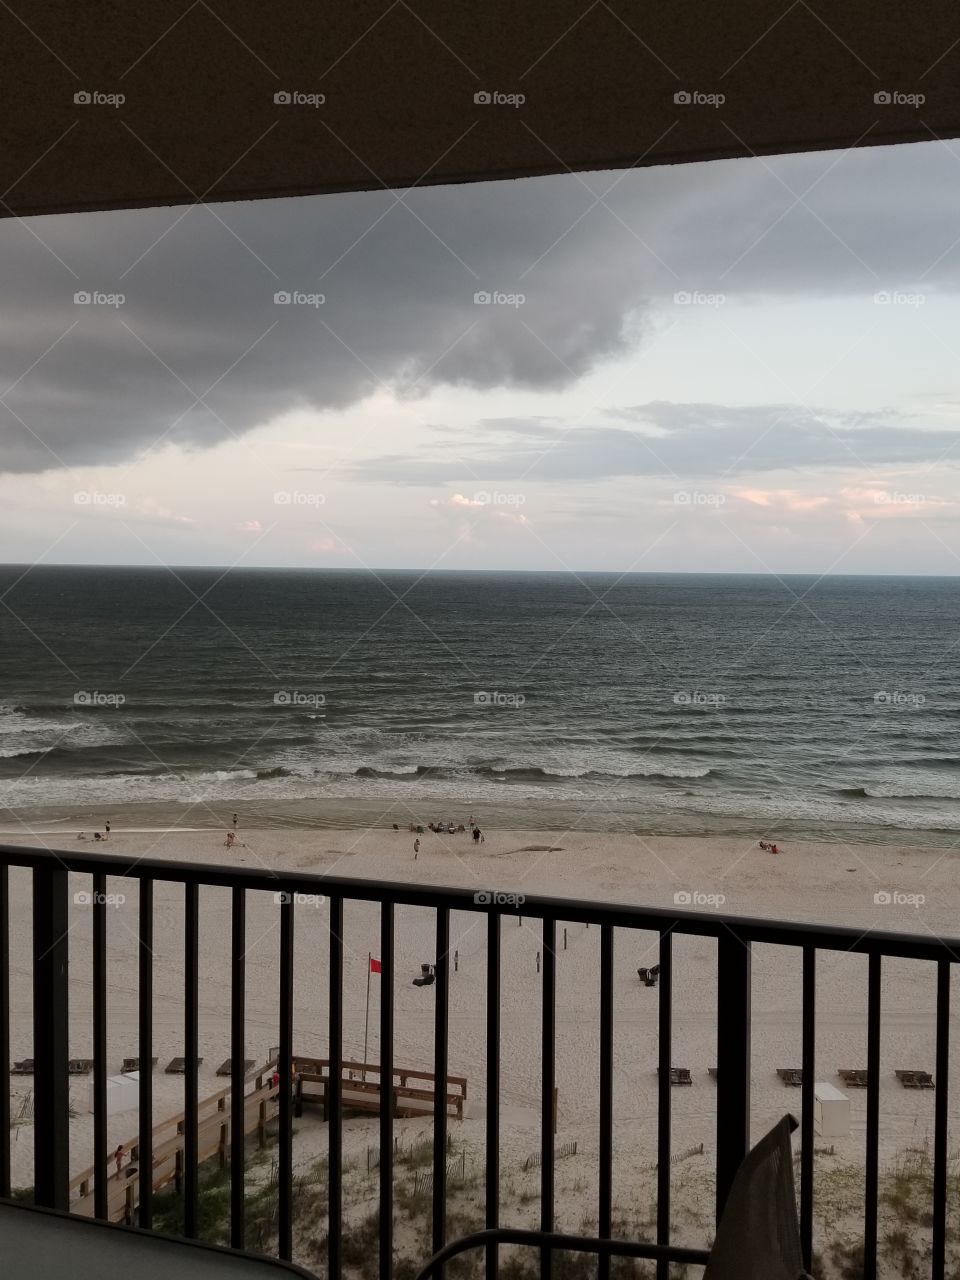 storm coming in. red flag day at the beach, hot, Alabama the beautiful